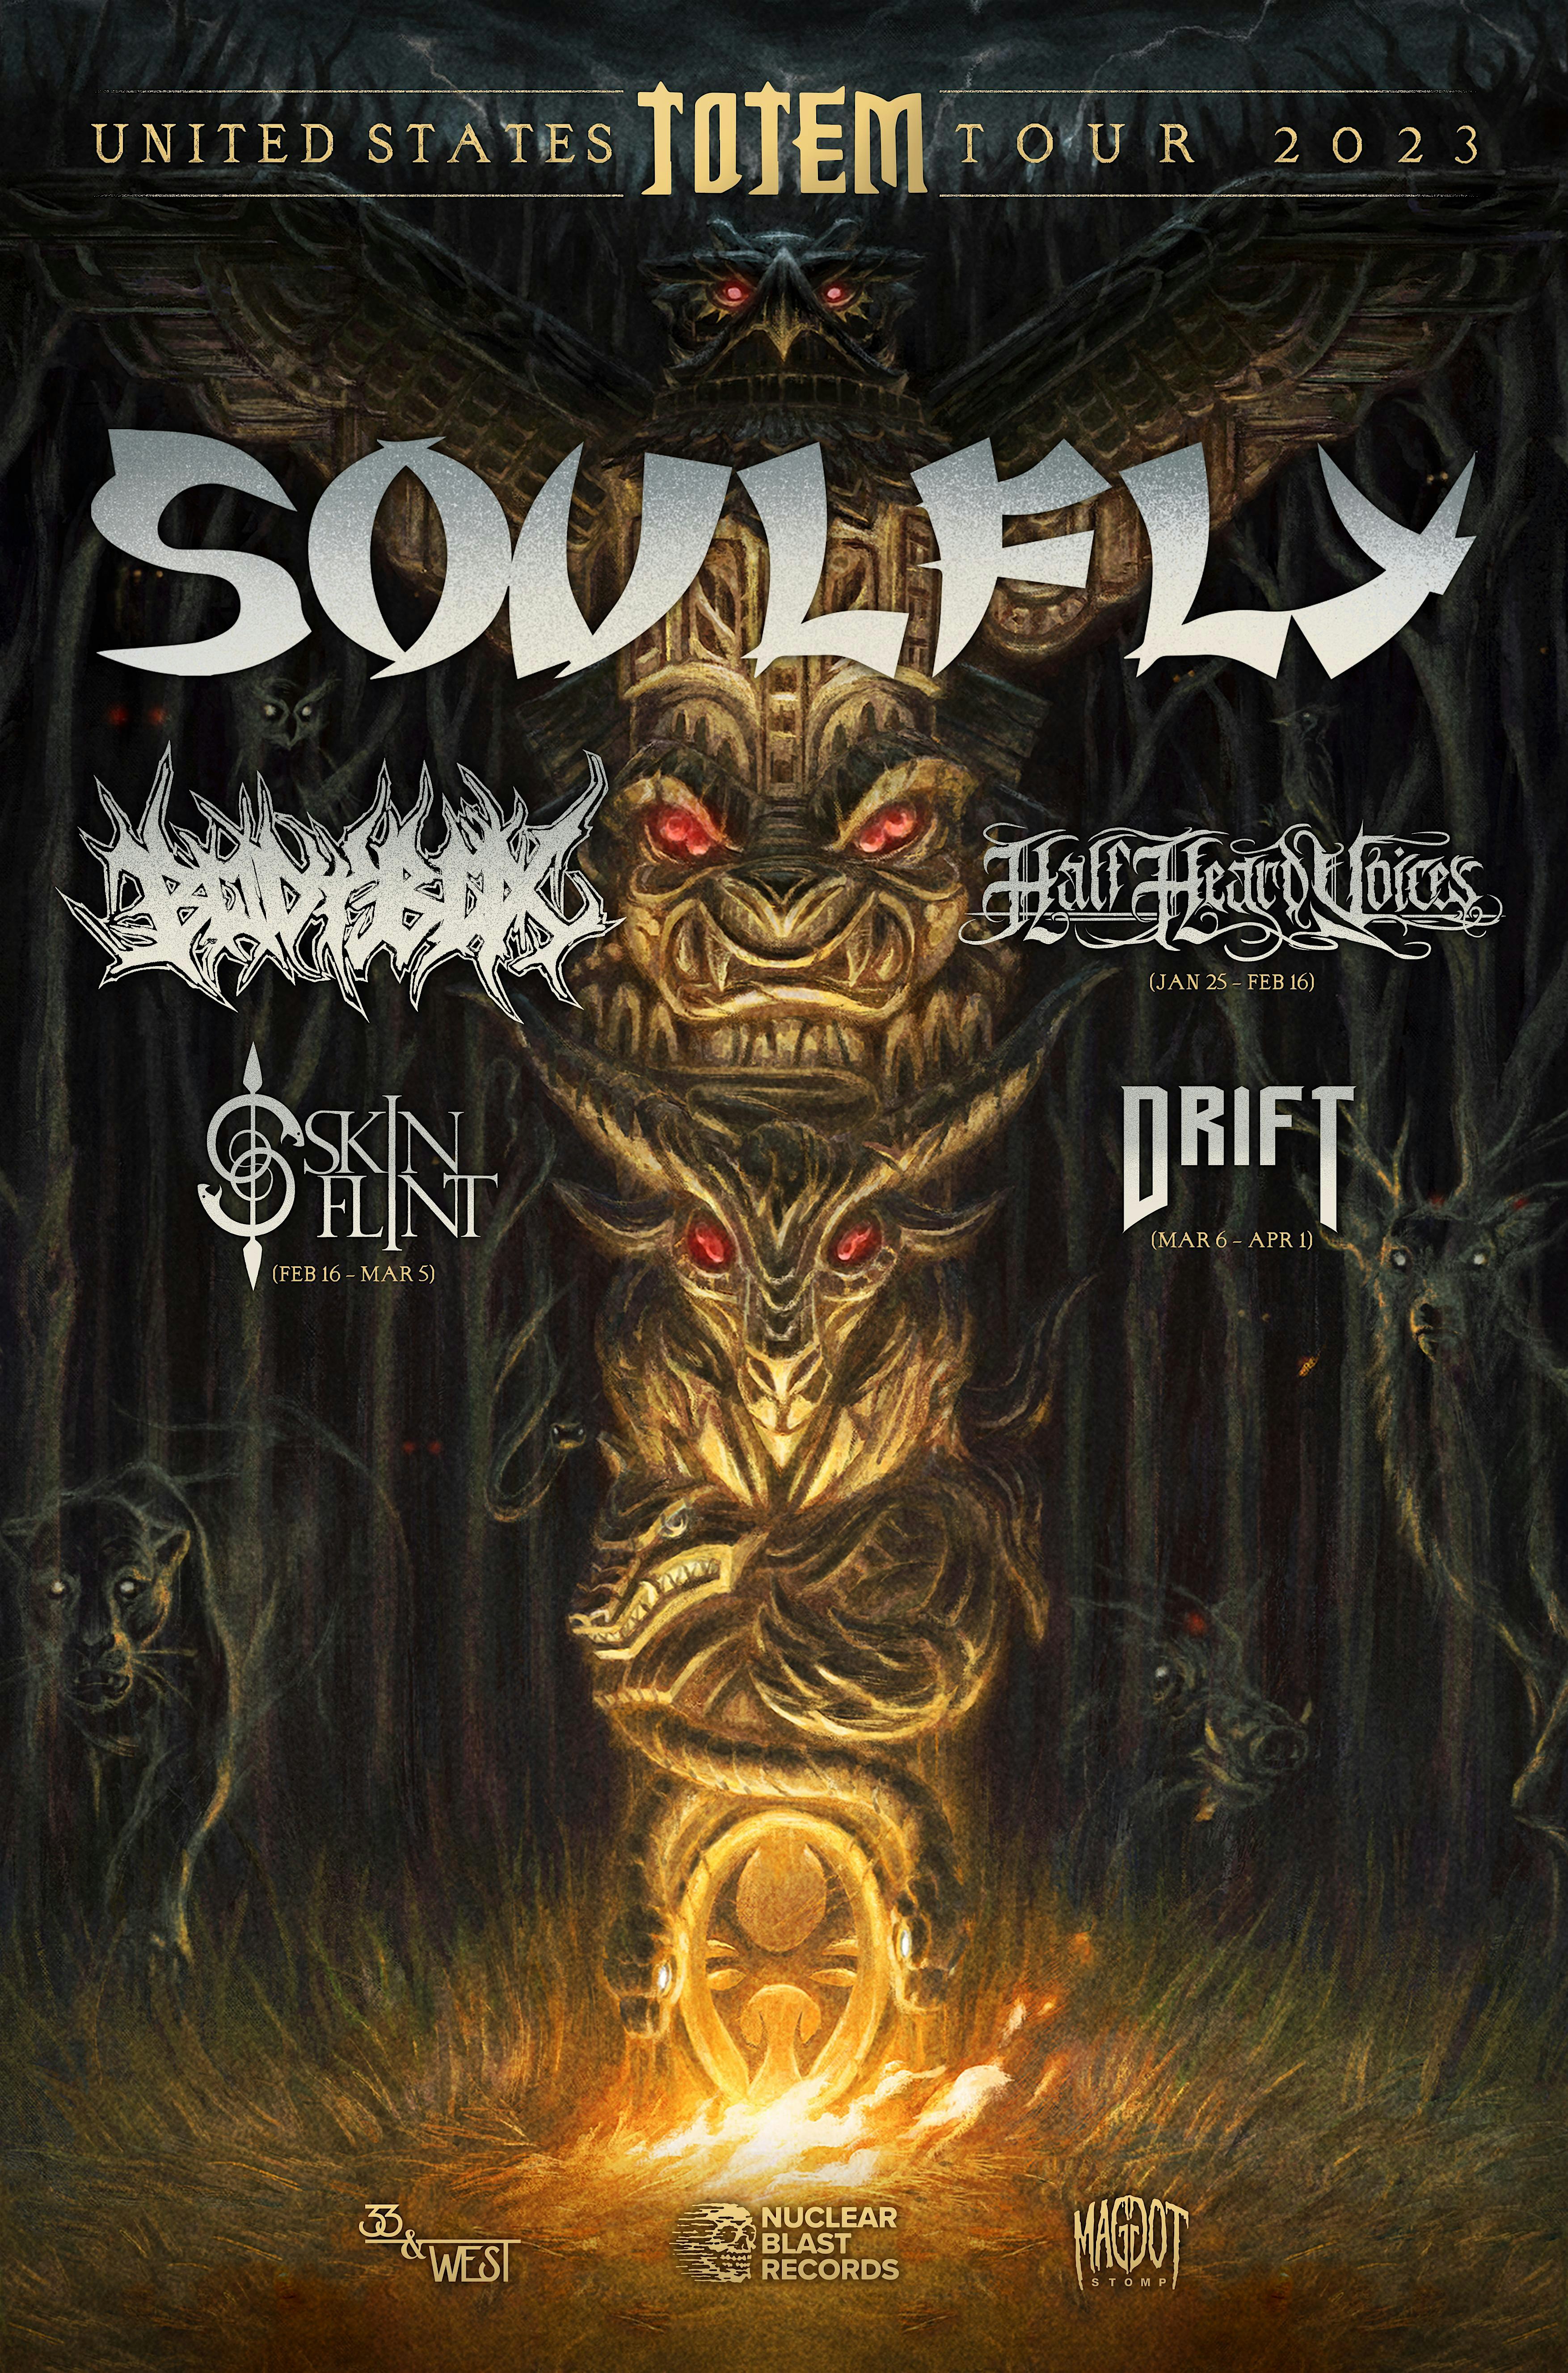 Soulfly, Bodybox, and Half Heard Voices in Jacksonville at Underbelly